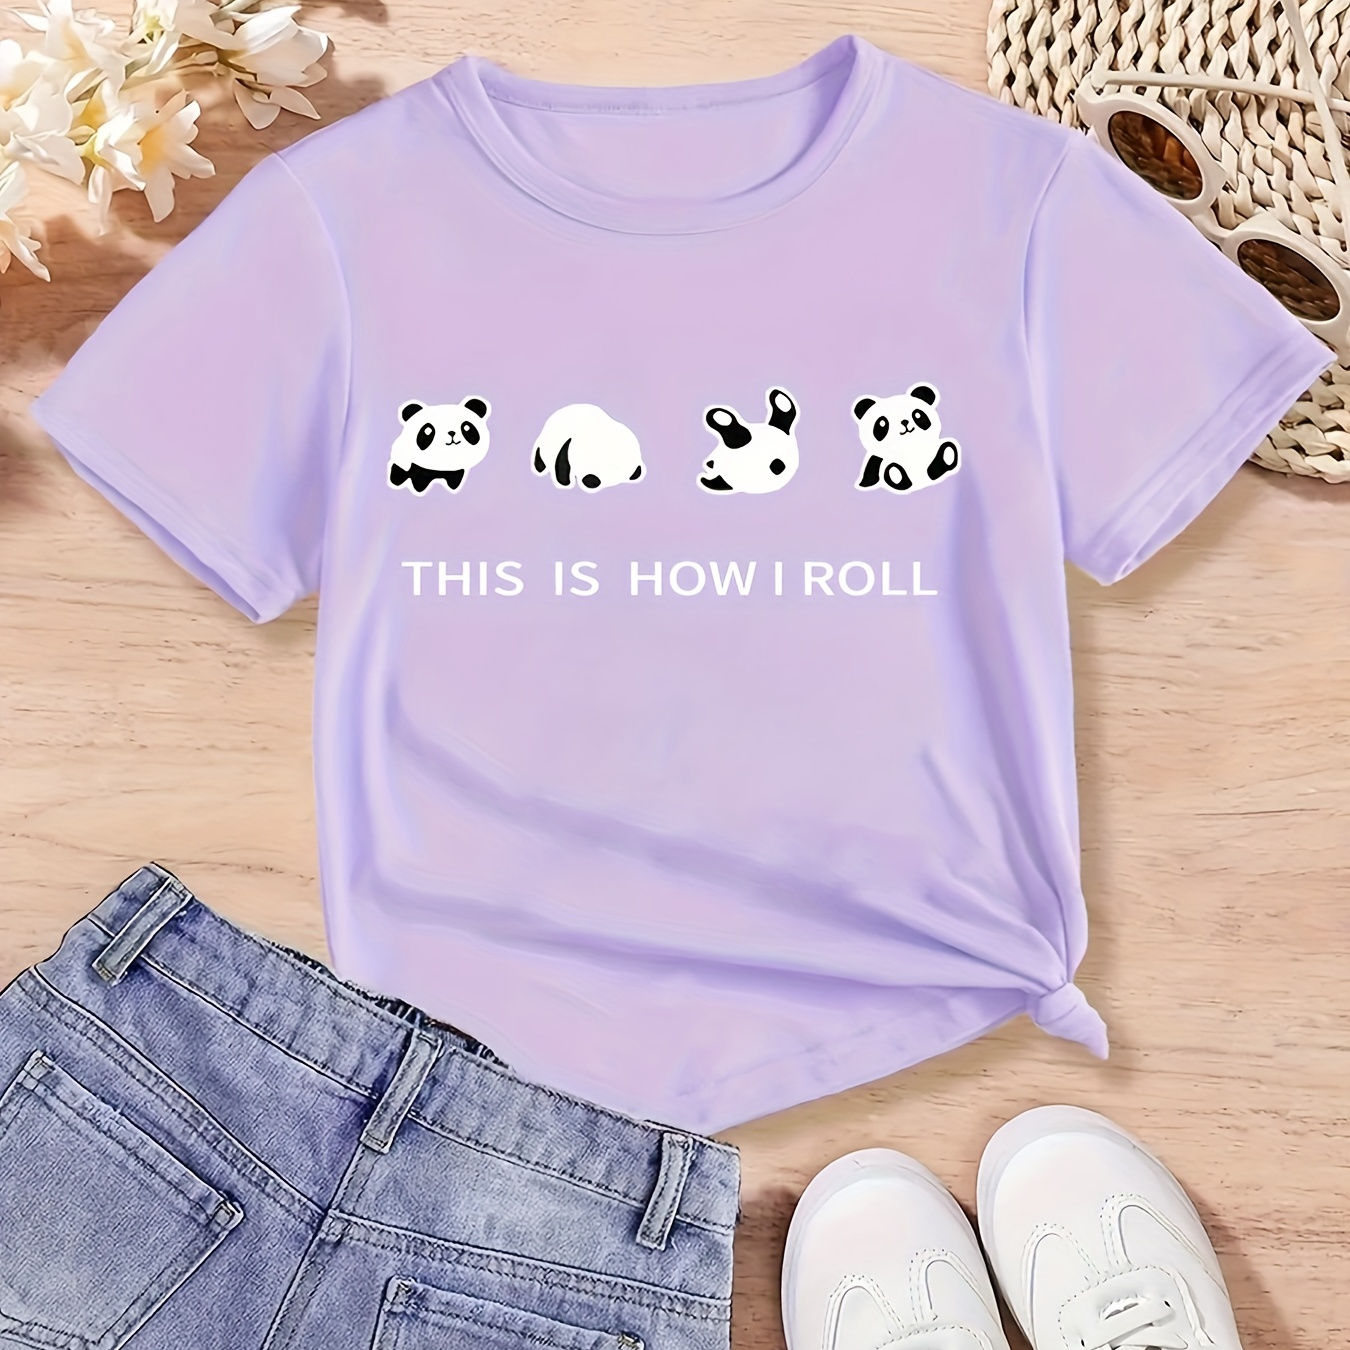 

Fun Rolling Pandas Graphic T-shirt For Girls, Cotton Comfy Short Sleeve Tee For A Trendy Look!